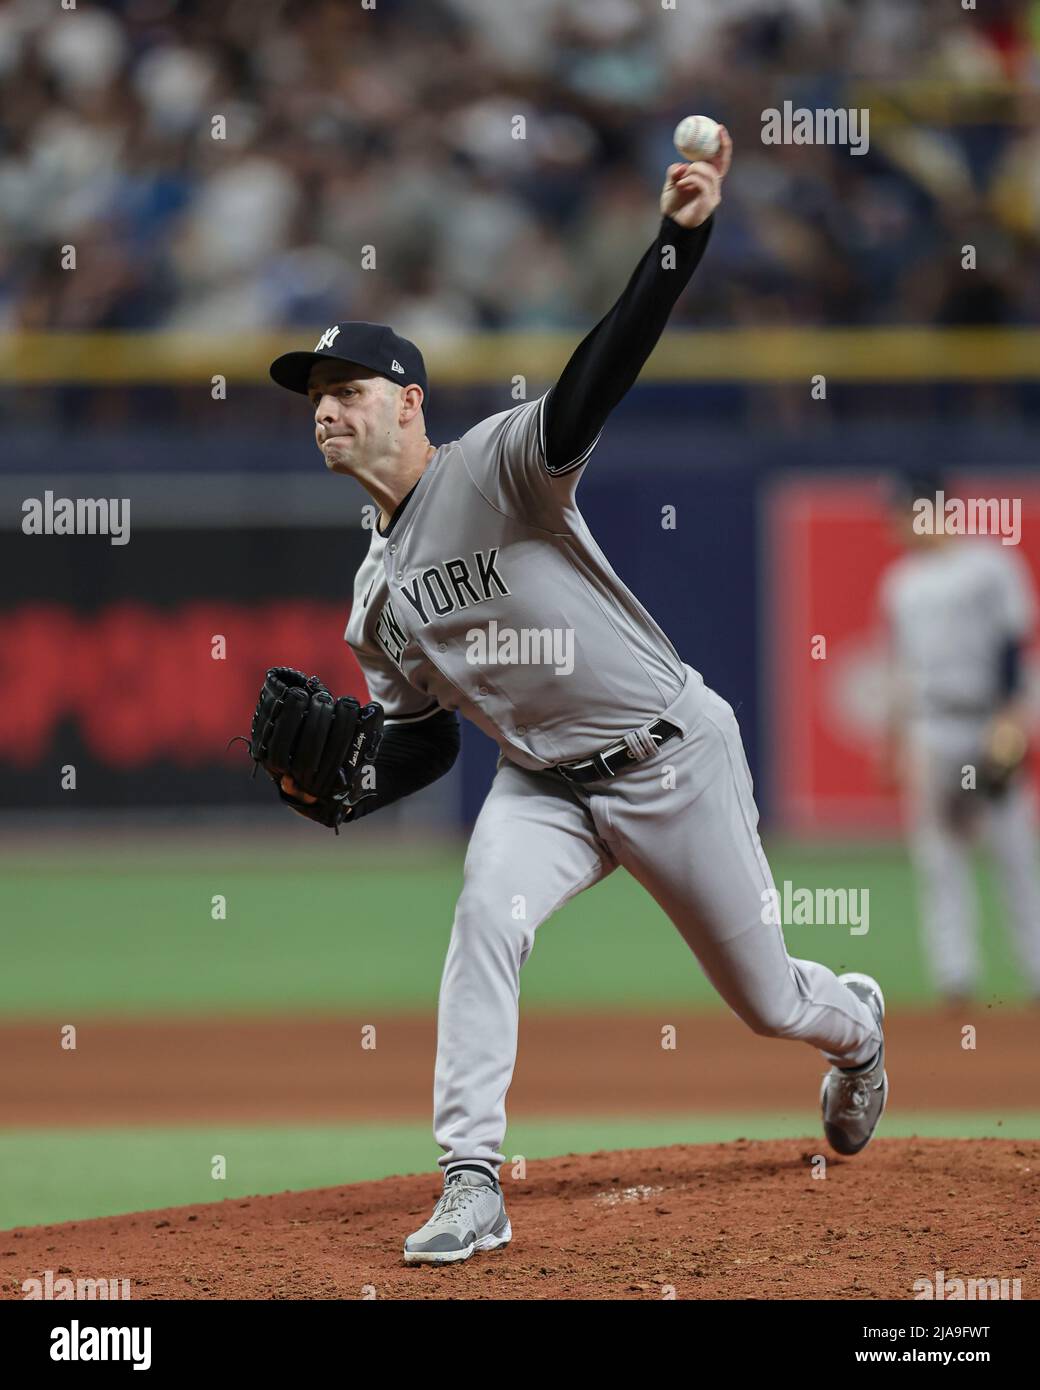 File:Lucas Luetge pitching for the New York Yankees on April 2021